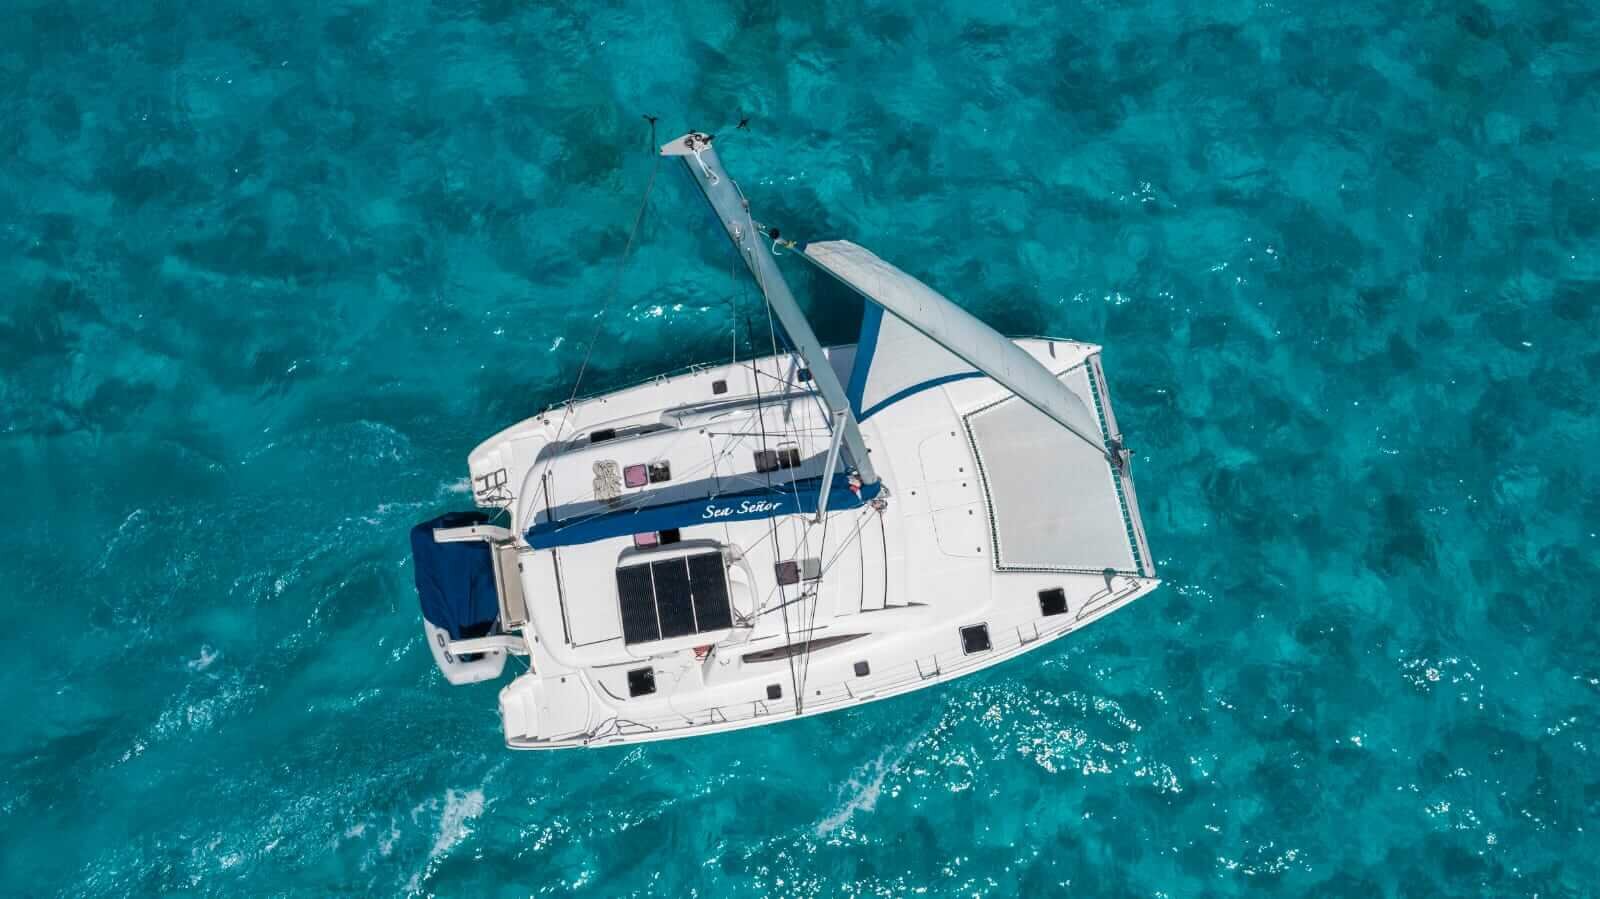 Overhead view of boat.jpeg